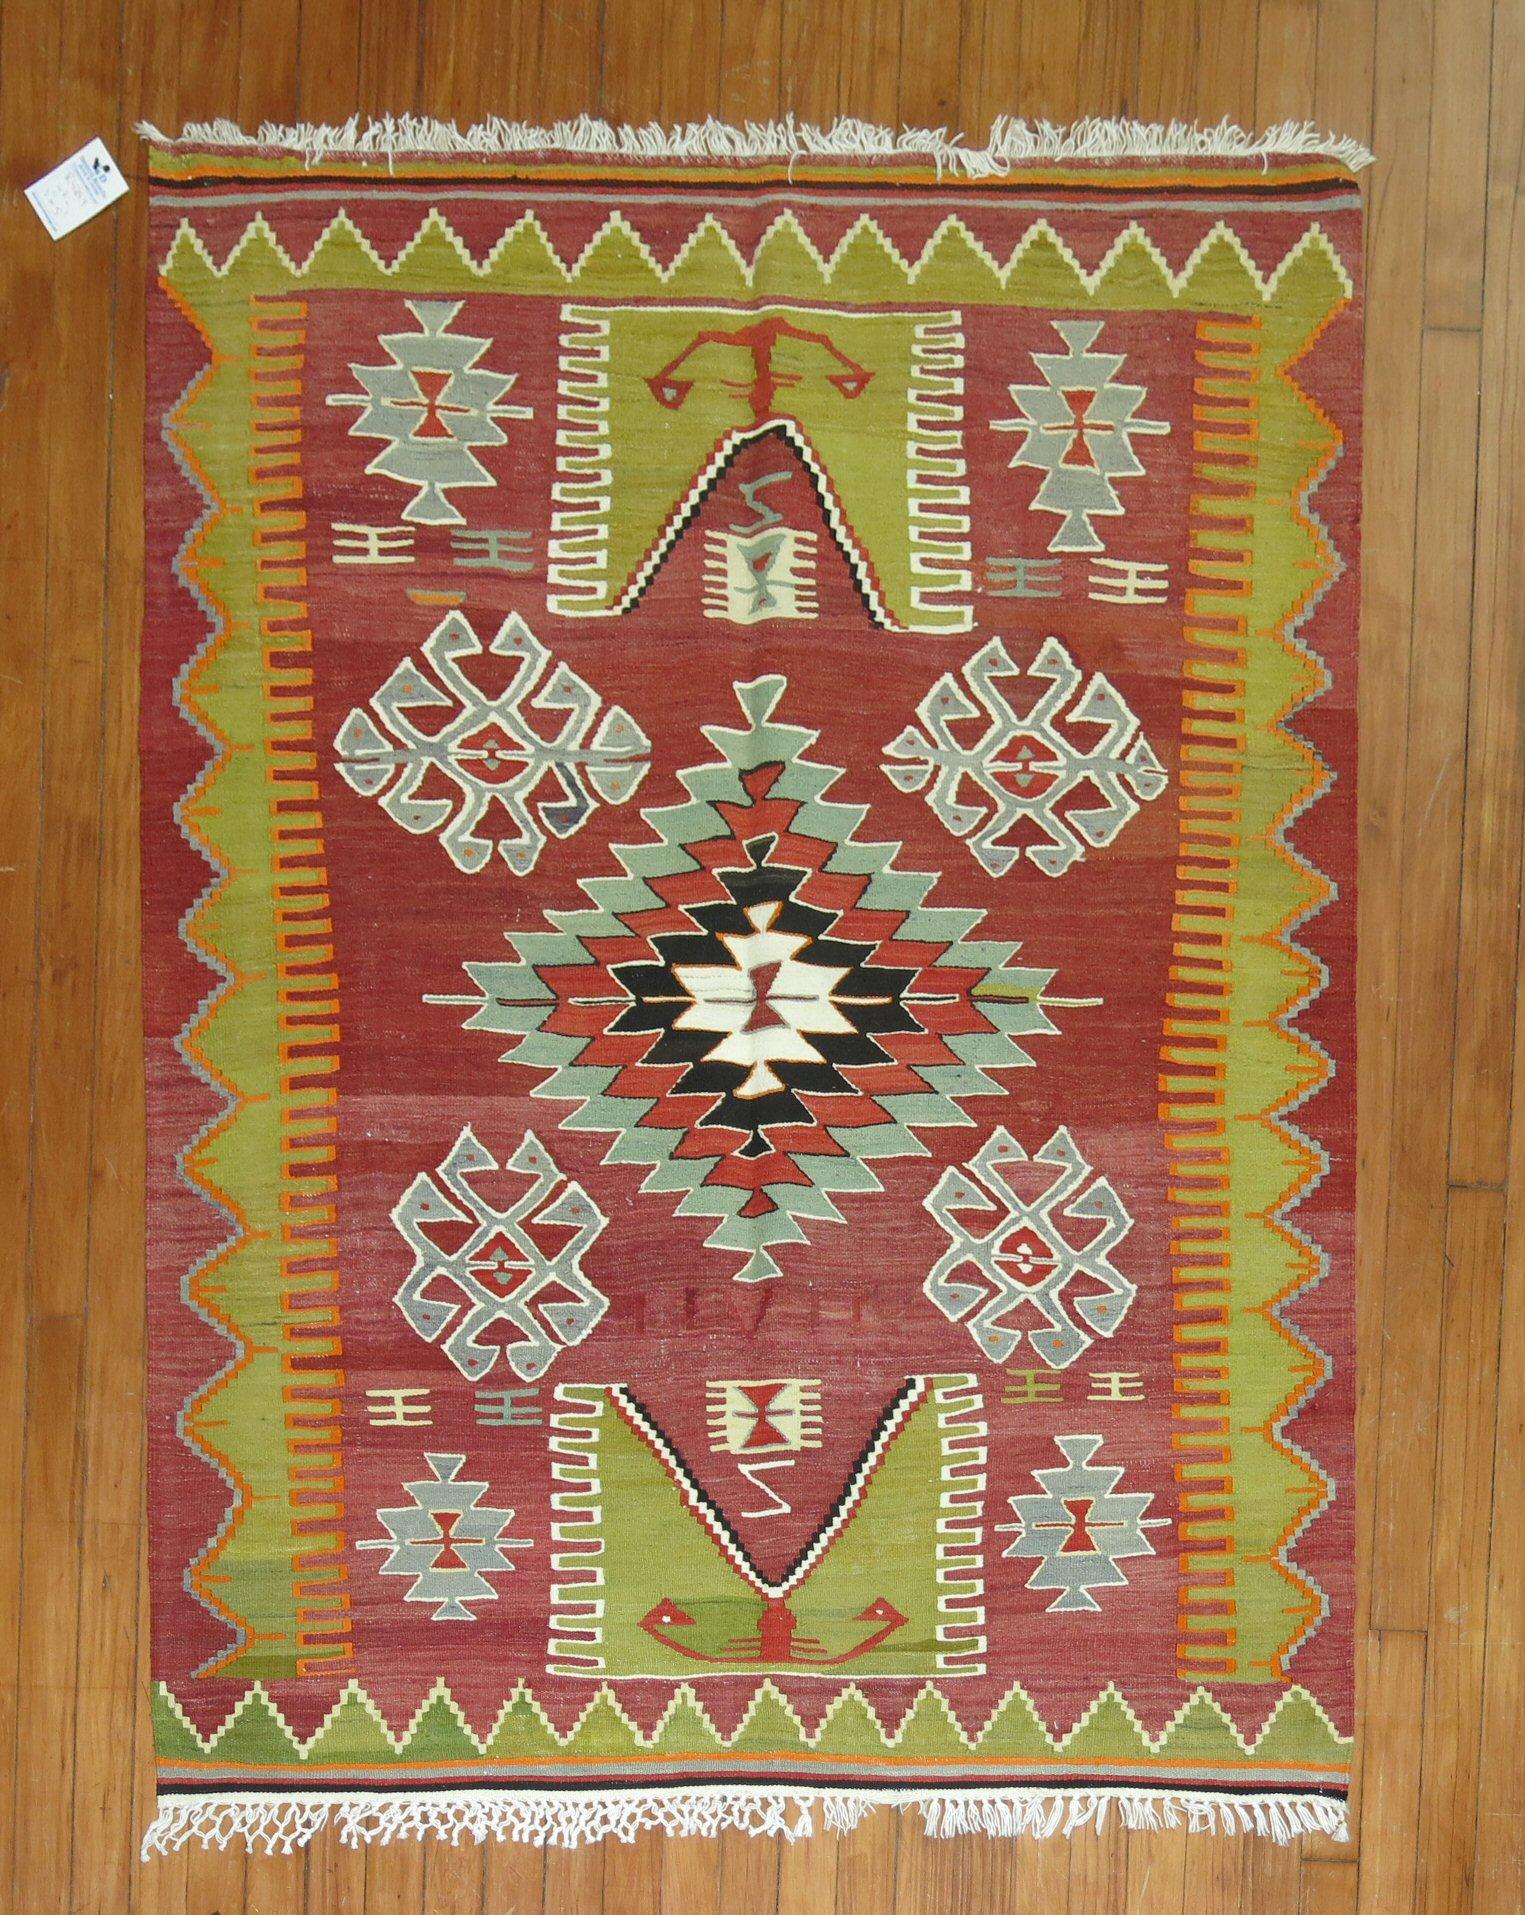 Colorful mid-20th century Turkish flat-weave Kilim with prayer motif.

Measures: 2'11